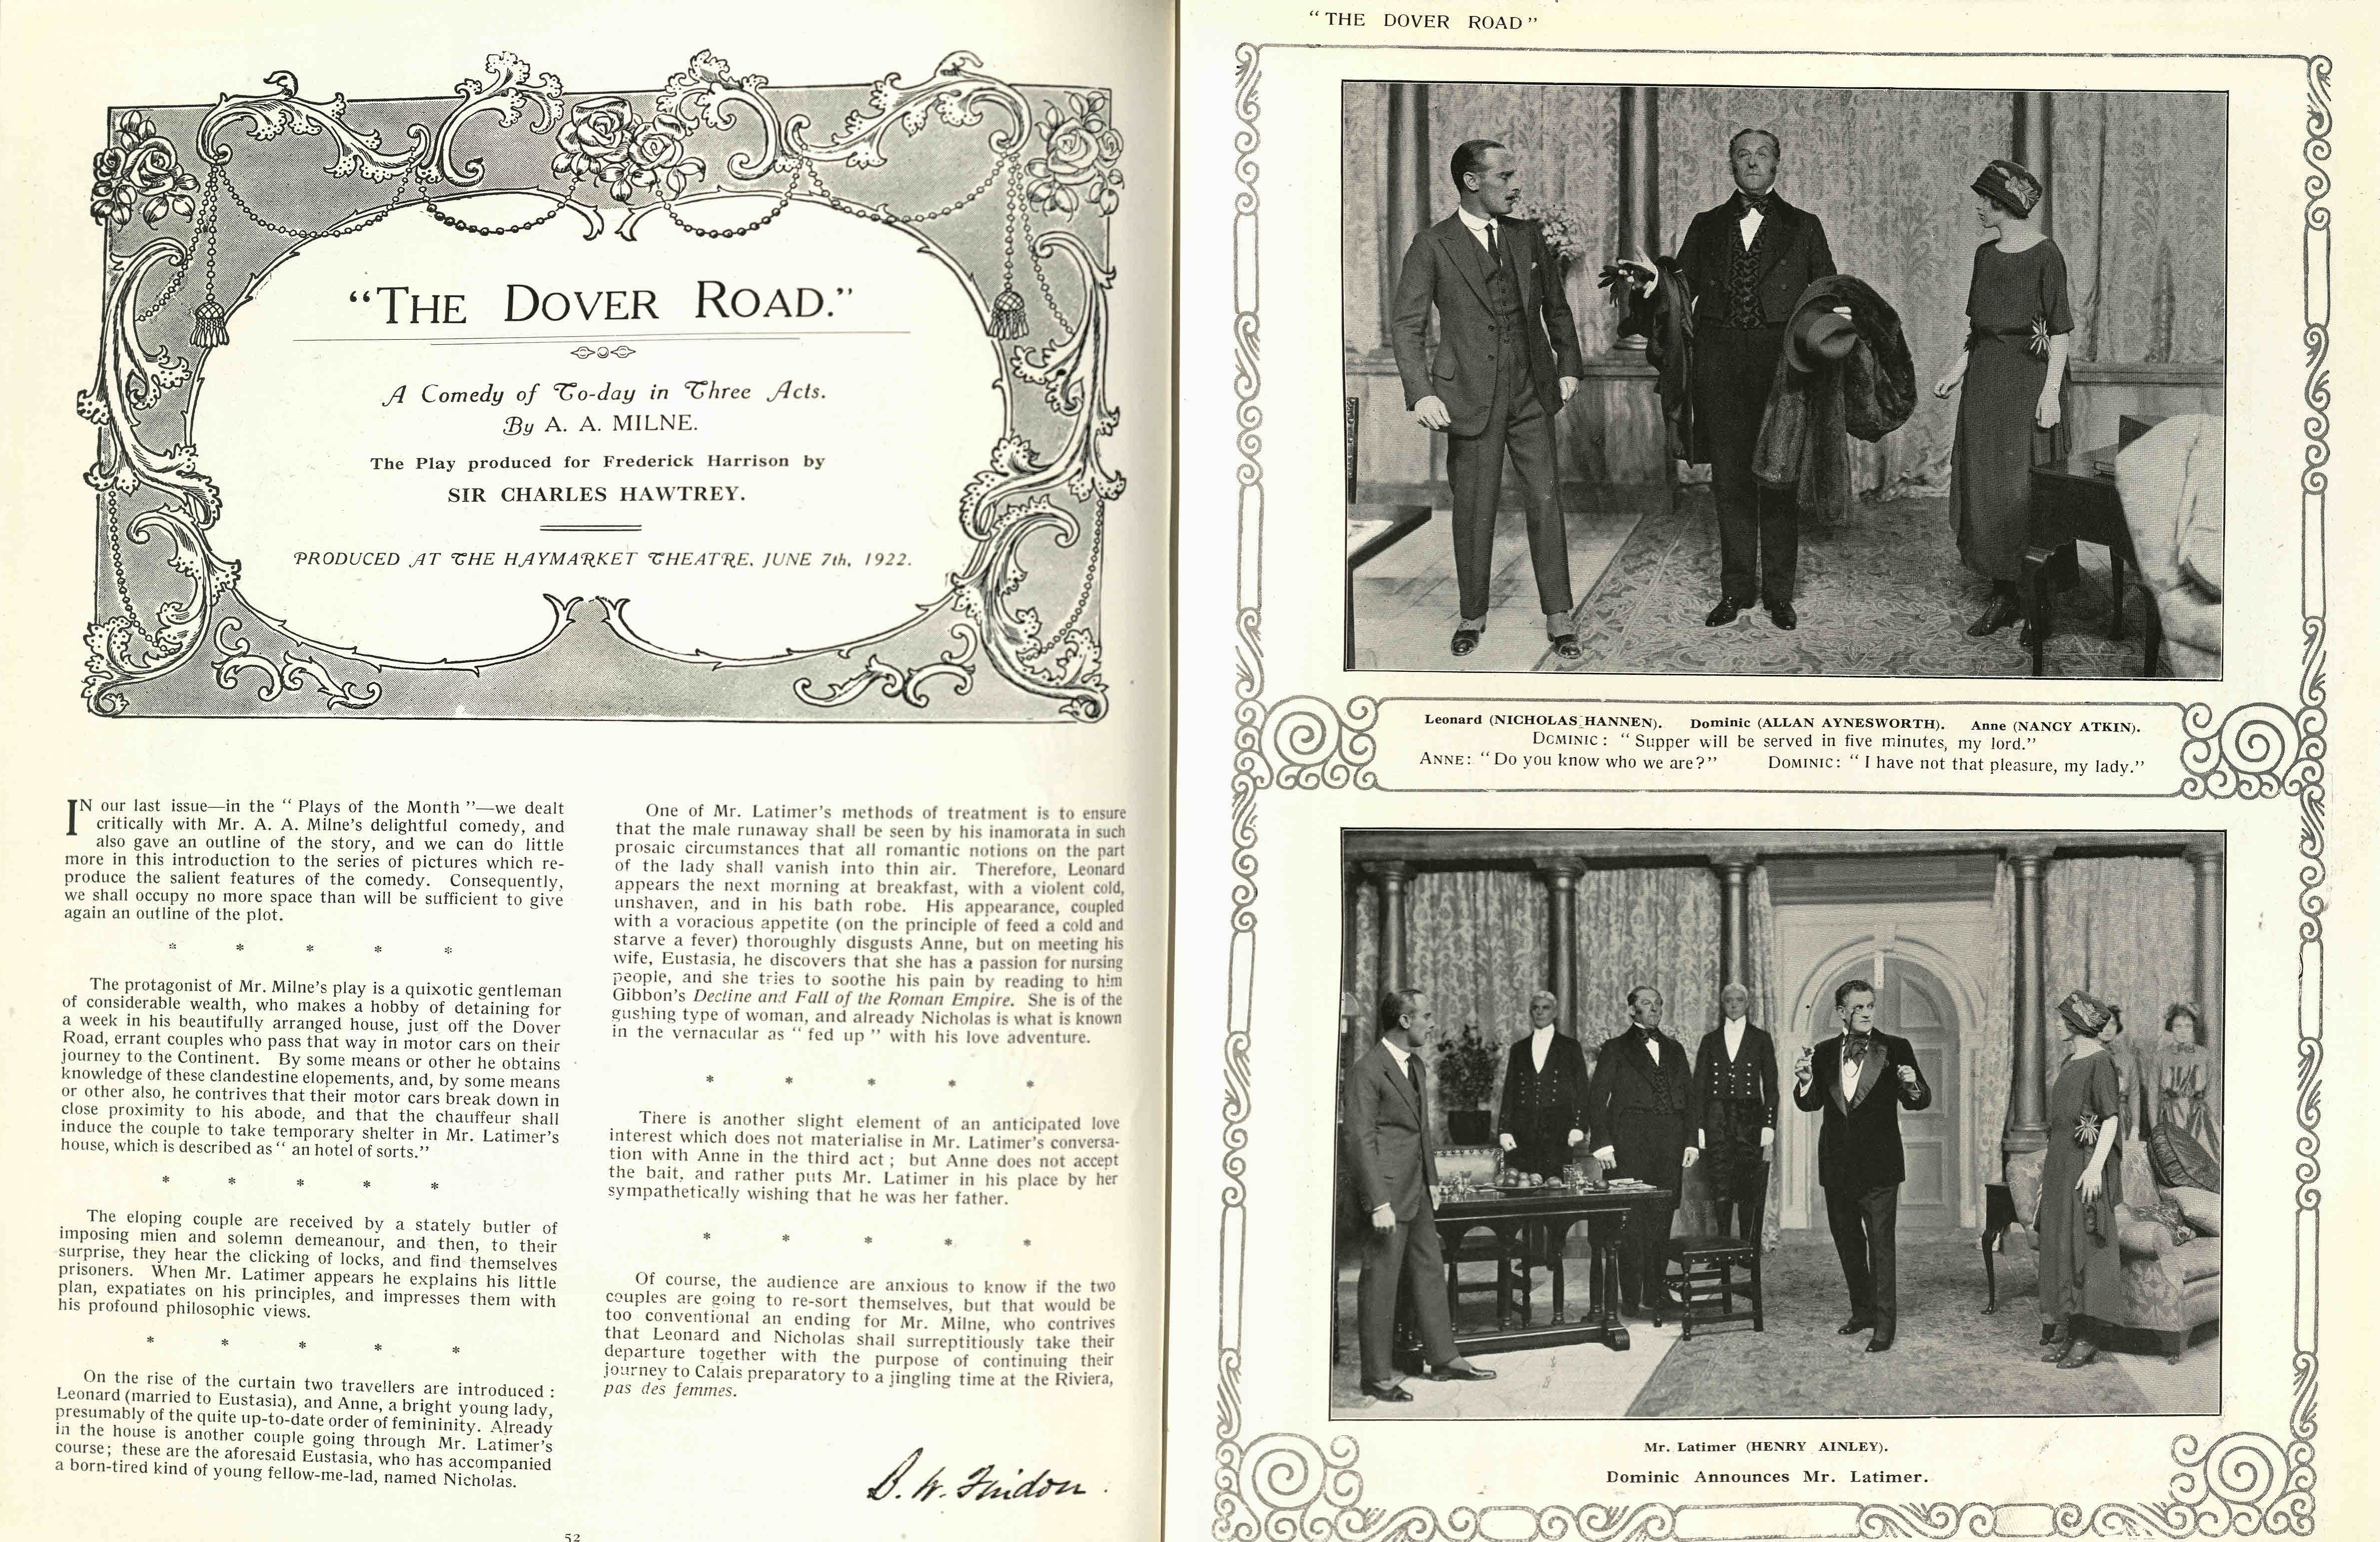 Description of and scenes from The Dover Road